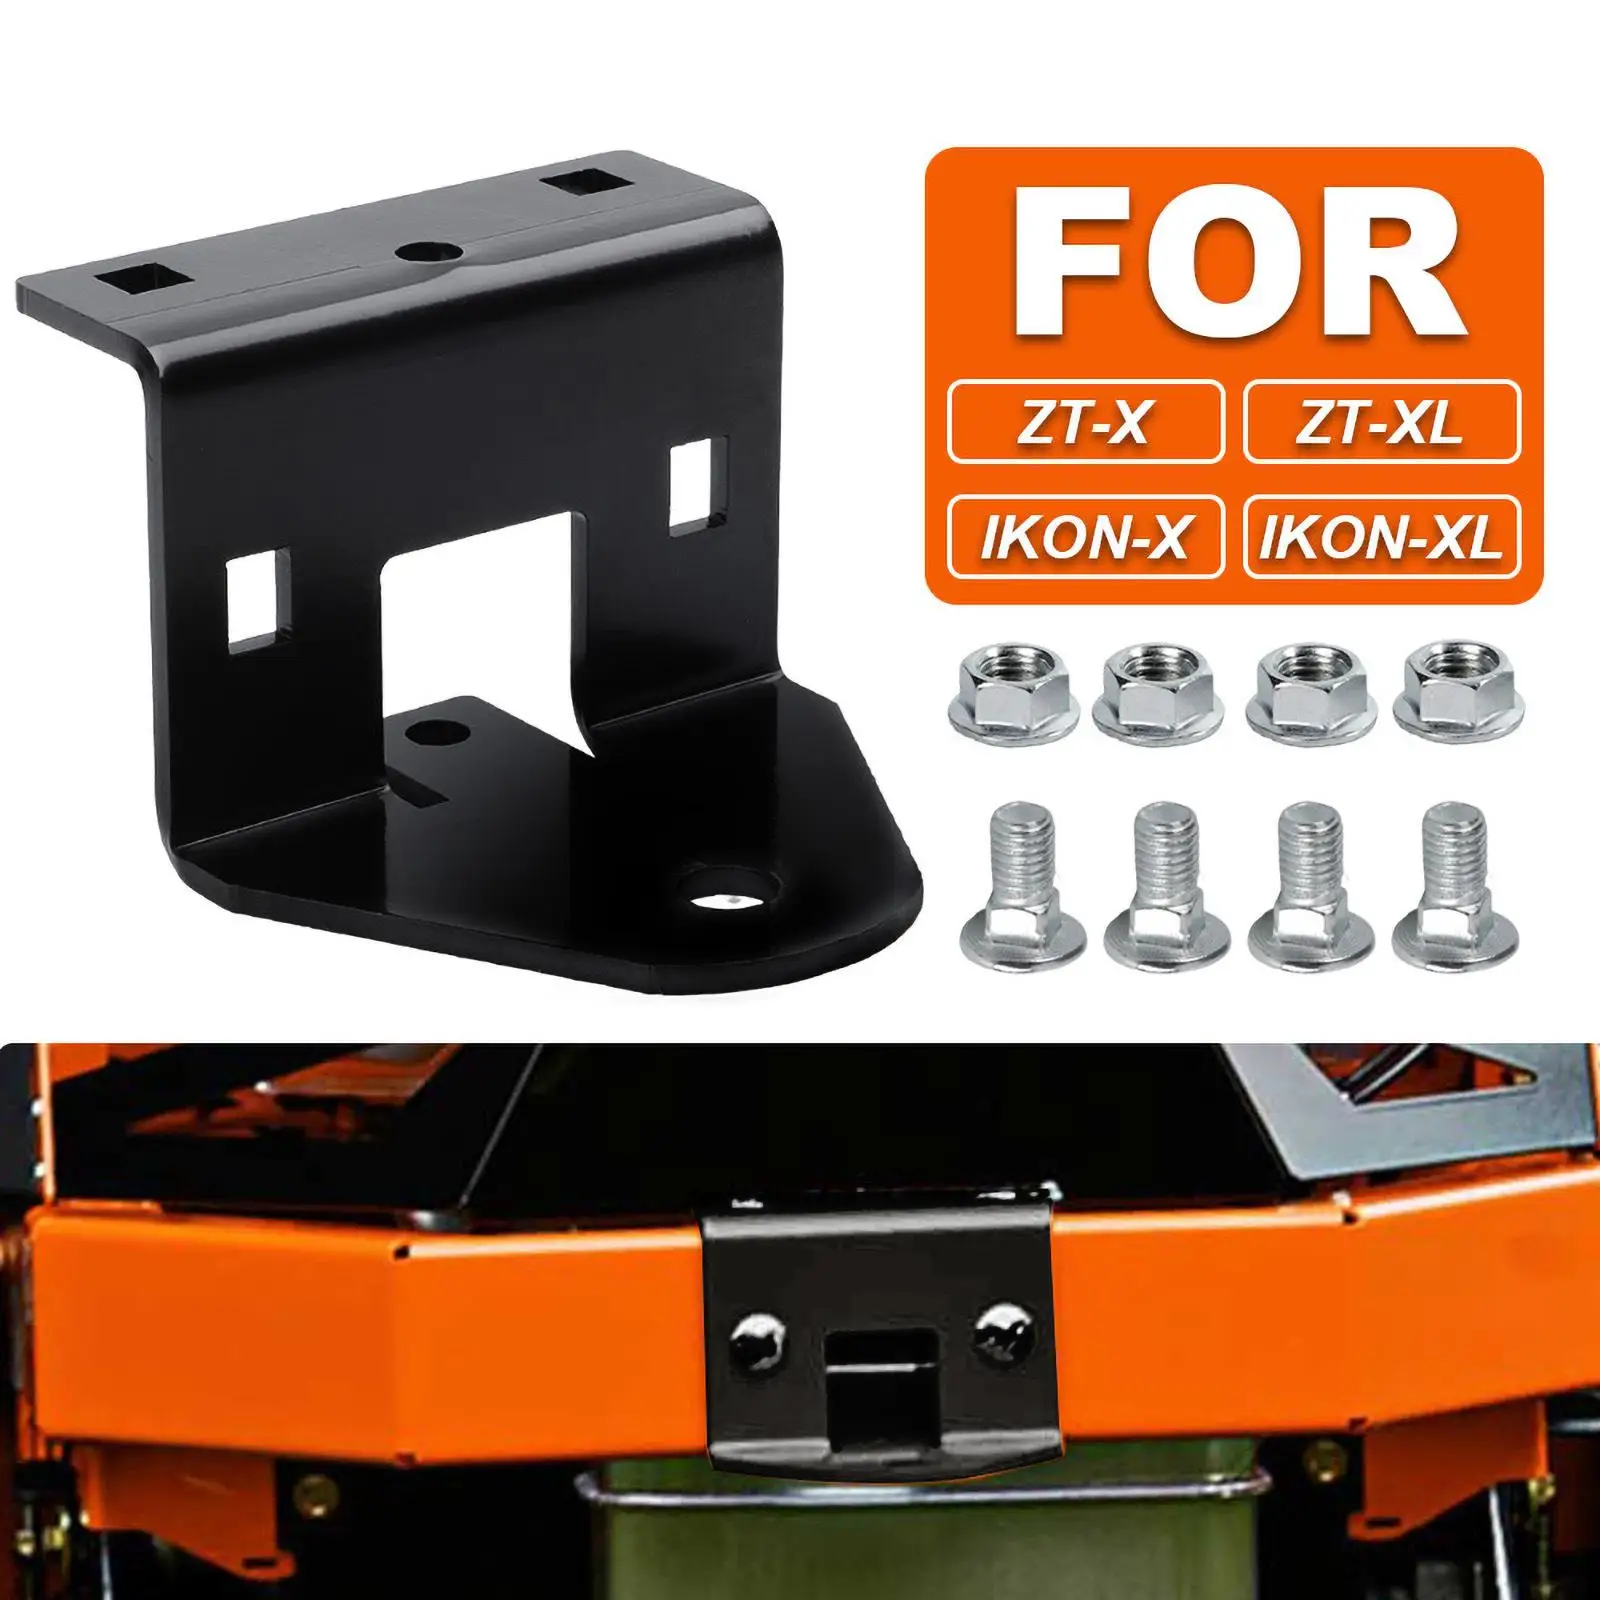 71514900 Trailer Hitch with Fittings for Ariens Gravely Zt-X Zt Replaces Parts Durable Easy to Install Accessories